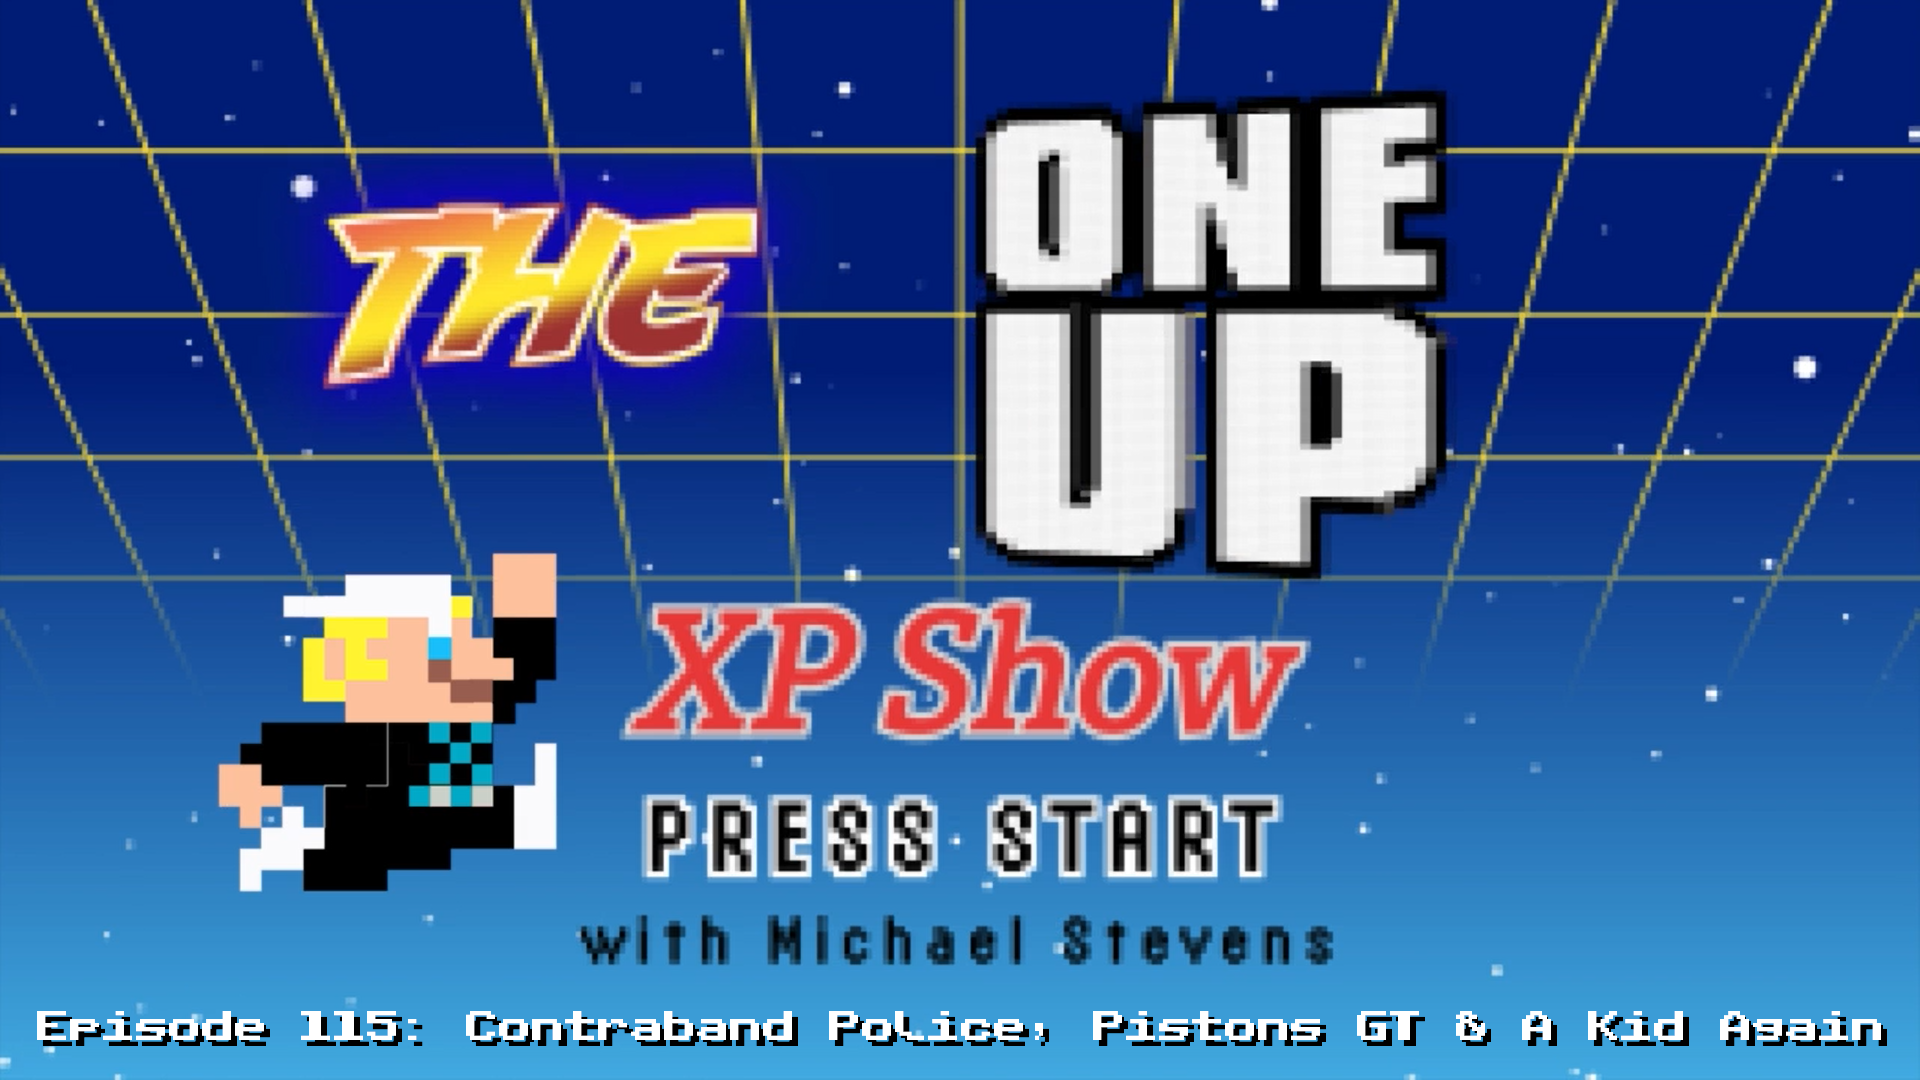 The One Up XP Show - Episode 115: Contraband Police, Pistons GT & A Kid Again